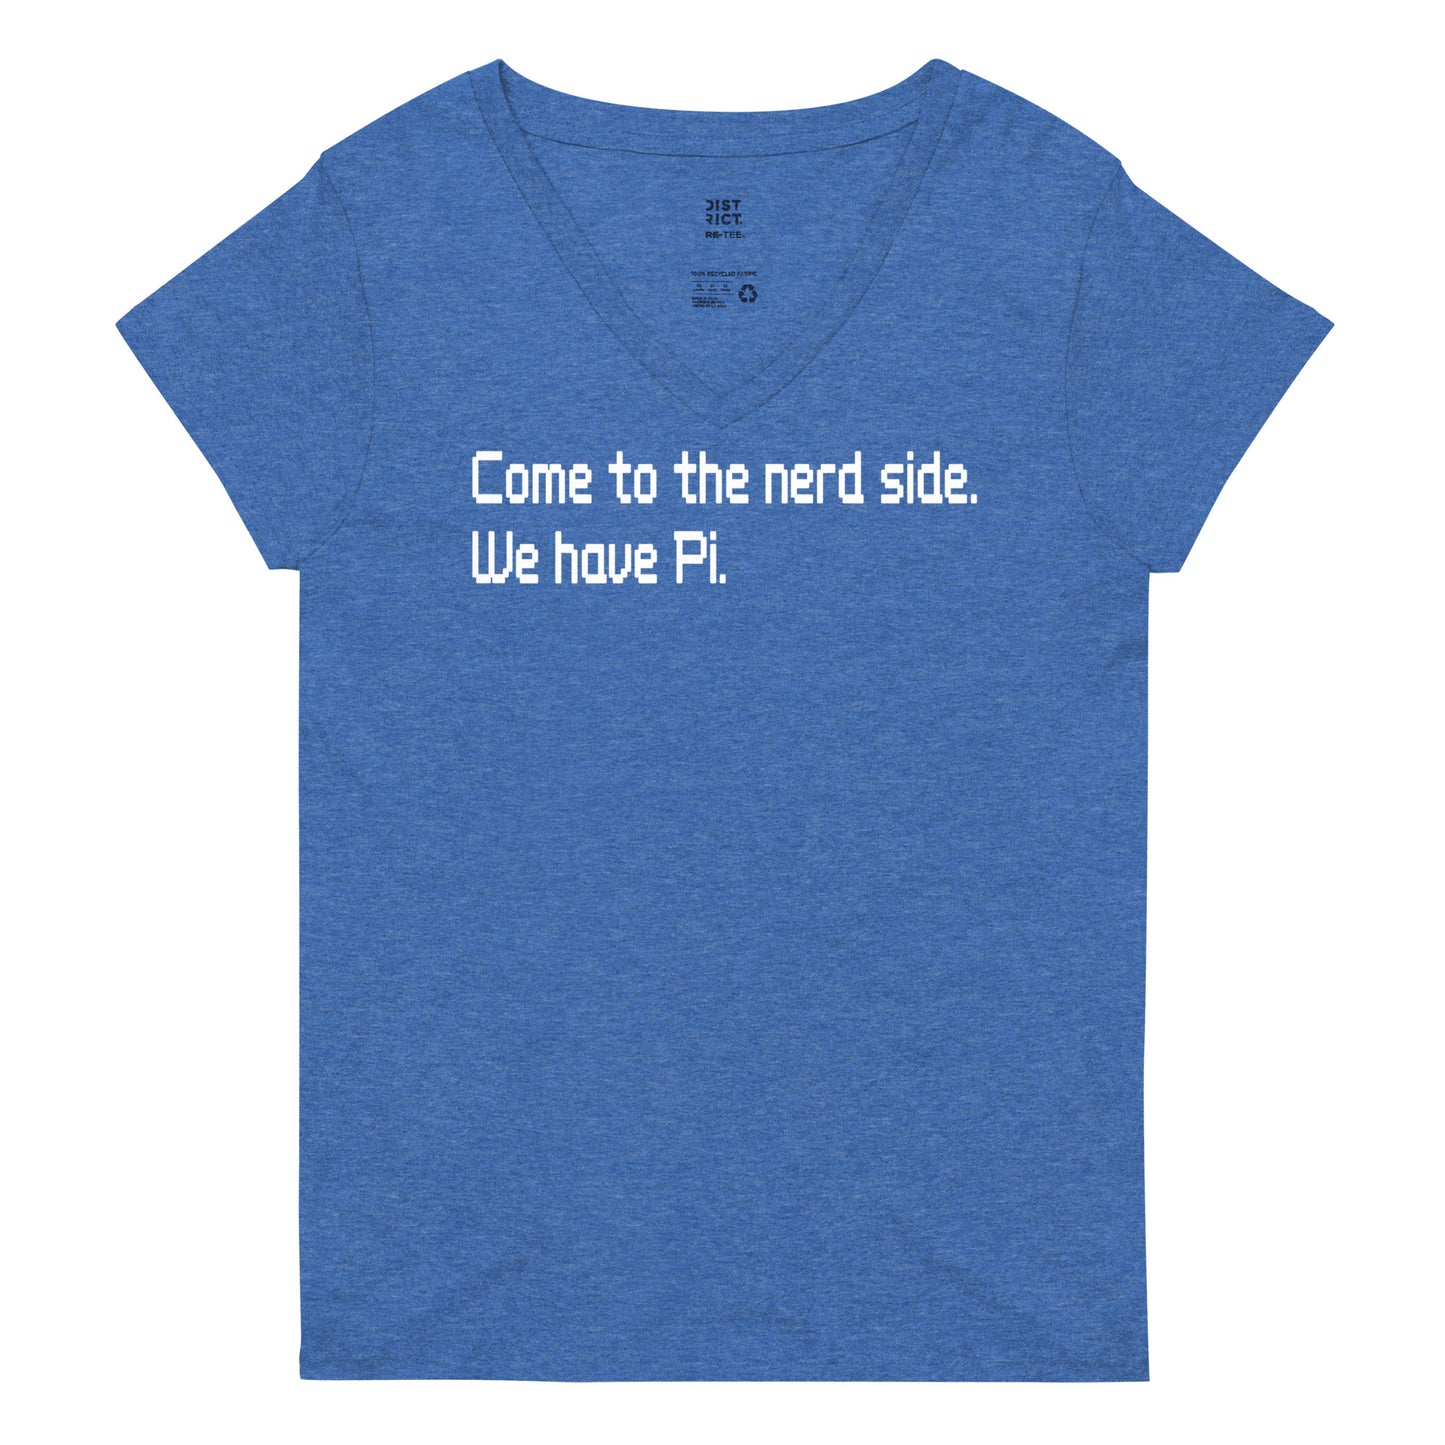 Come To The Nerd Side. We Have Pi. Women's V-Neck Tee